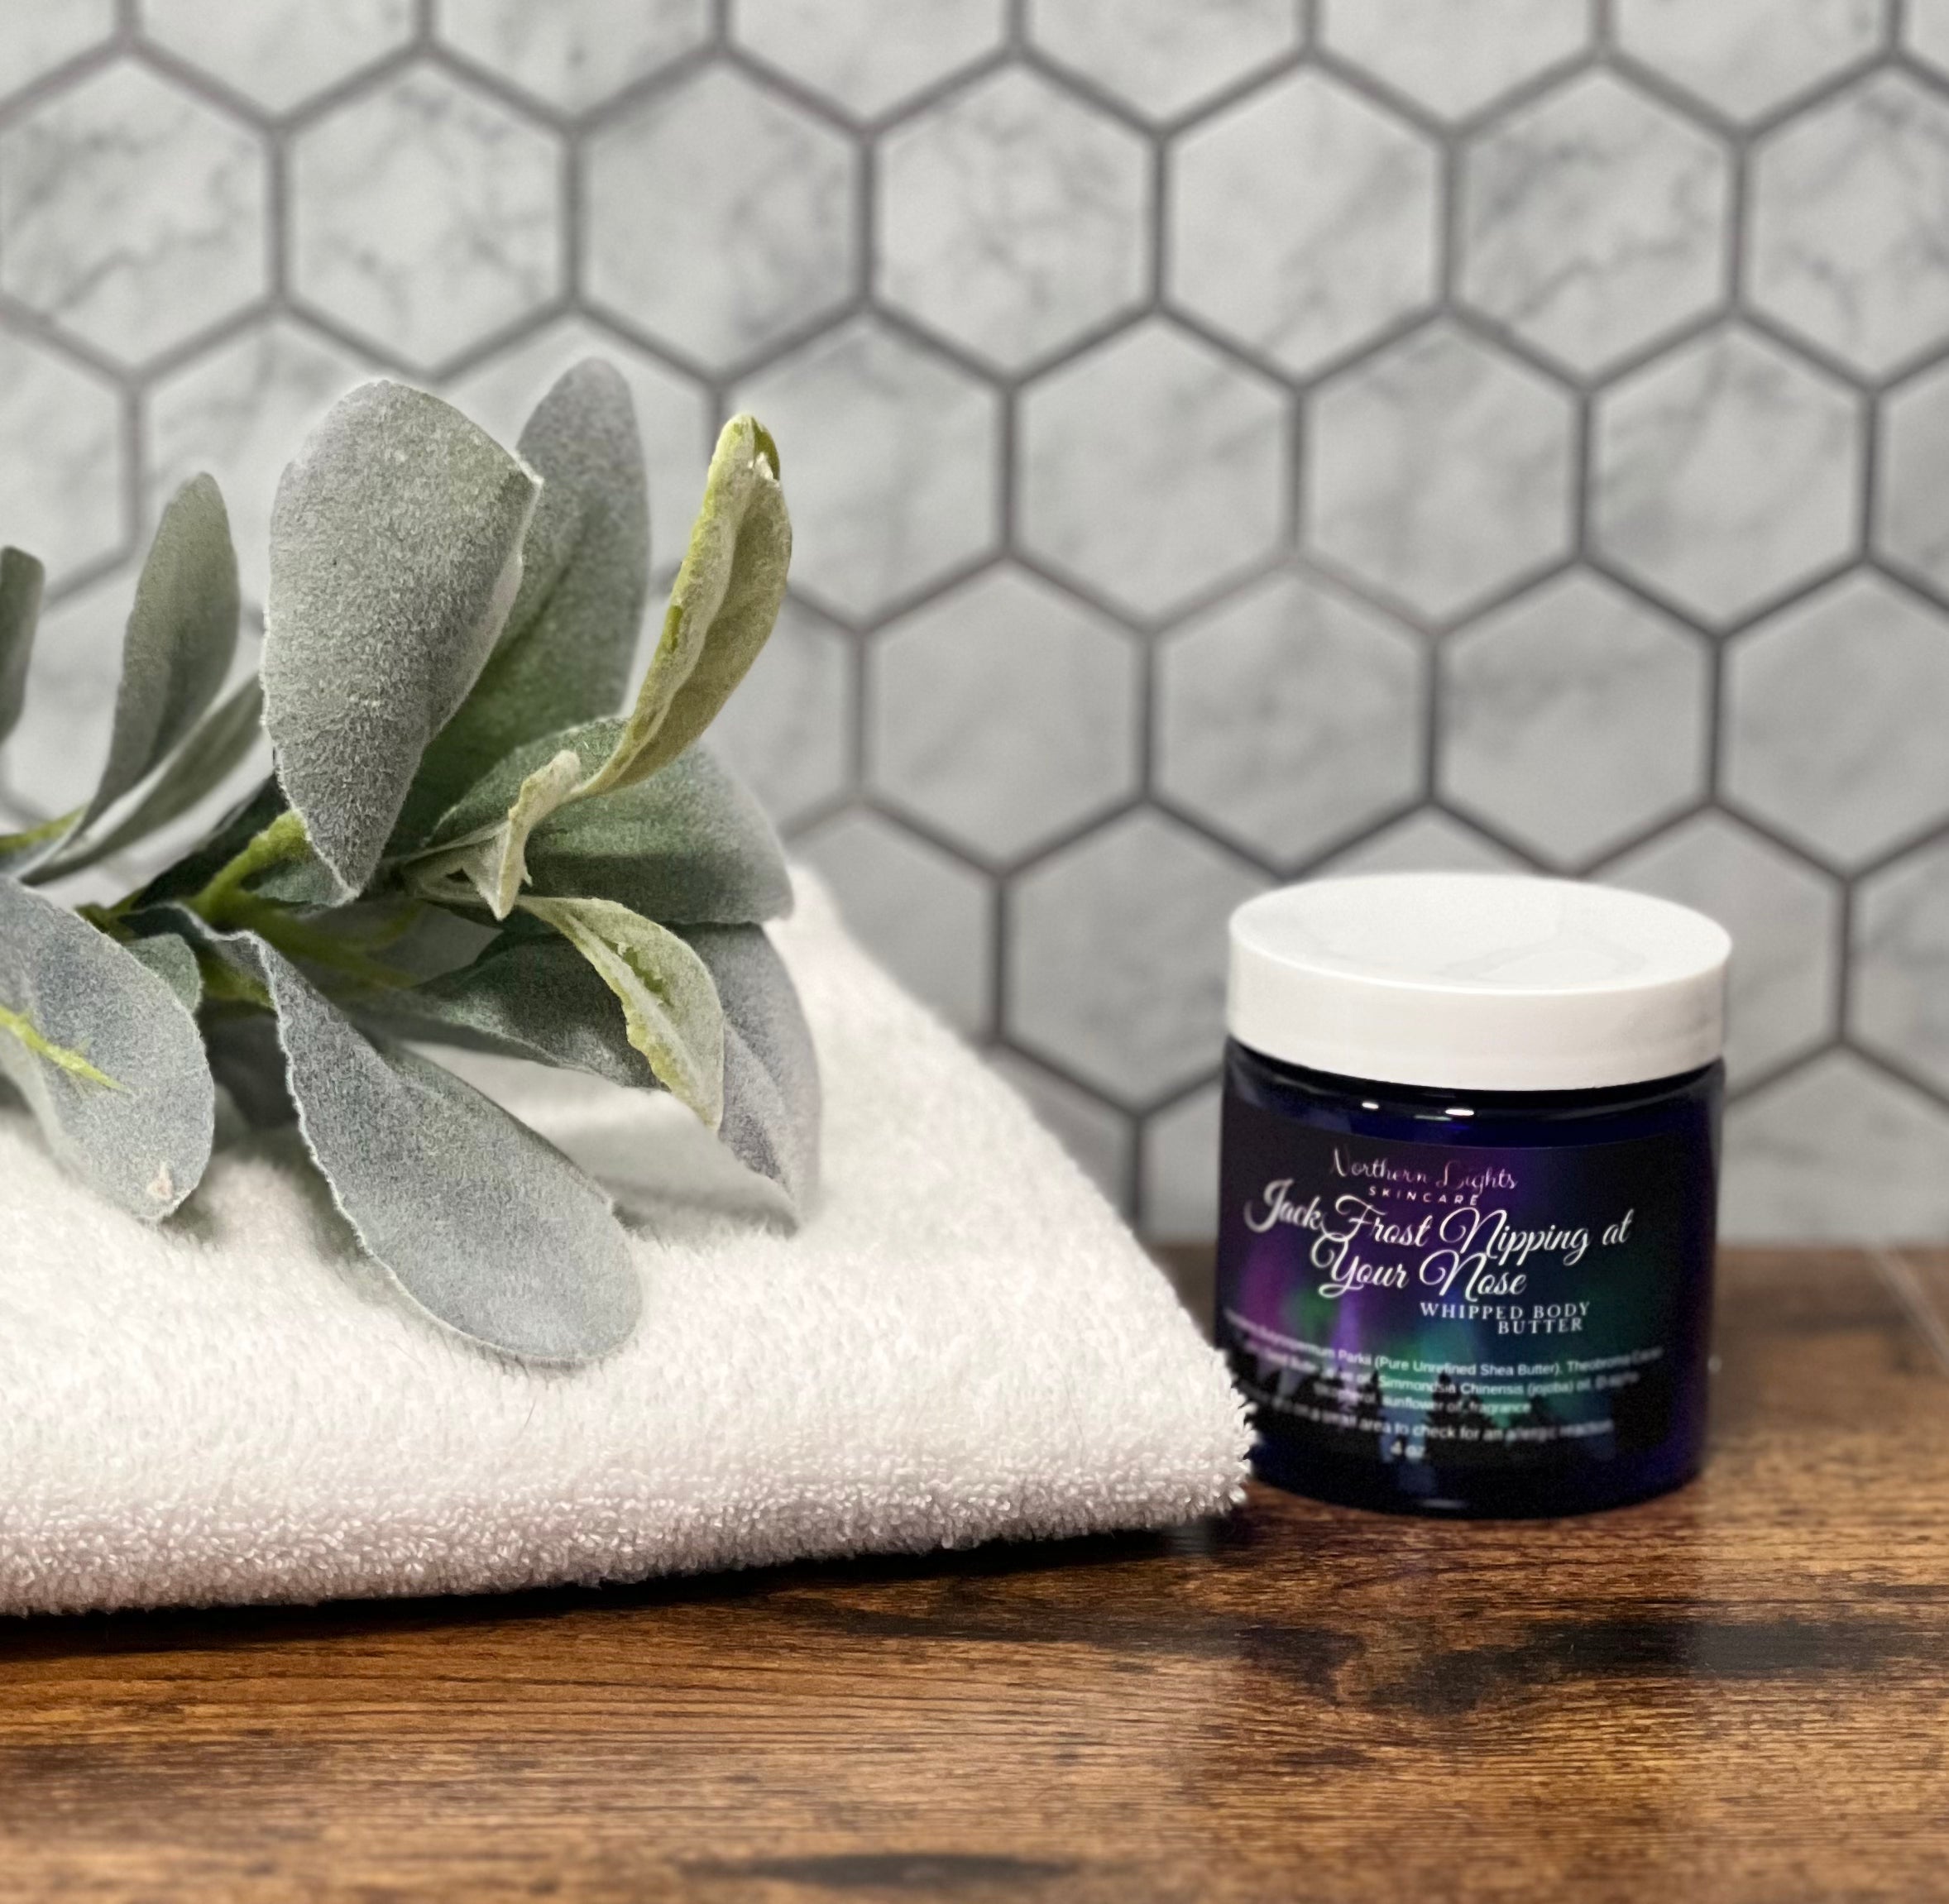 Jack Frost Nipping at Your Nose Whipped Body Butter